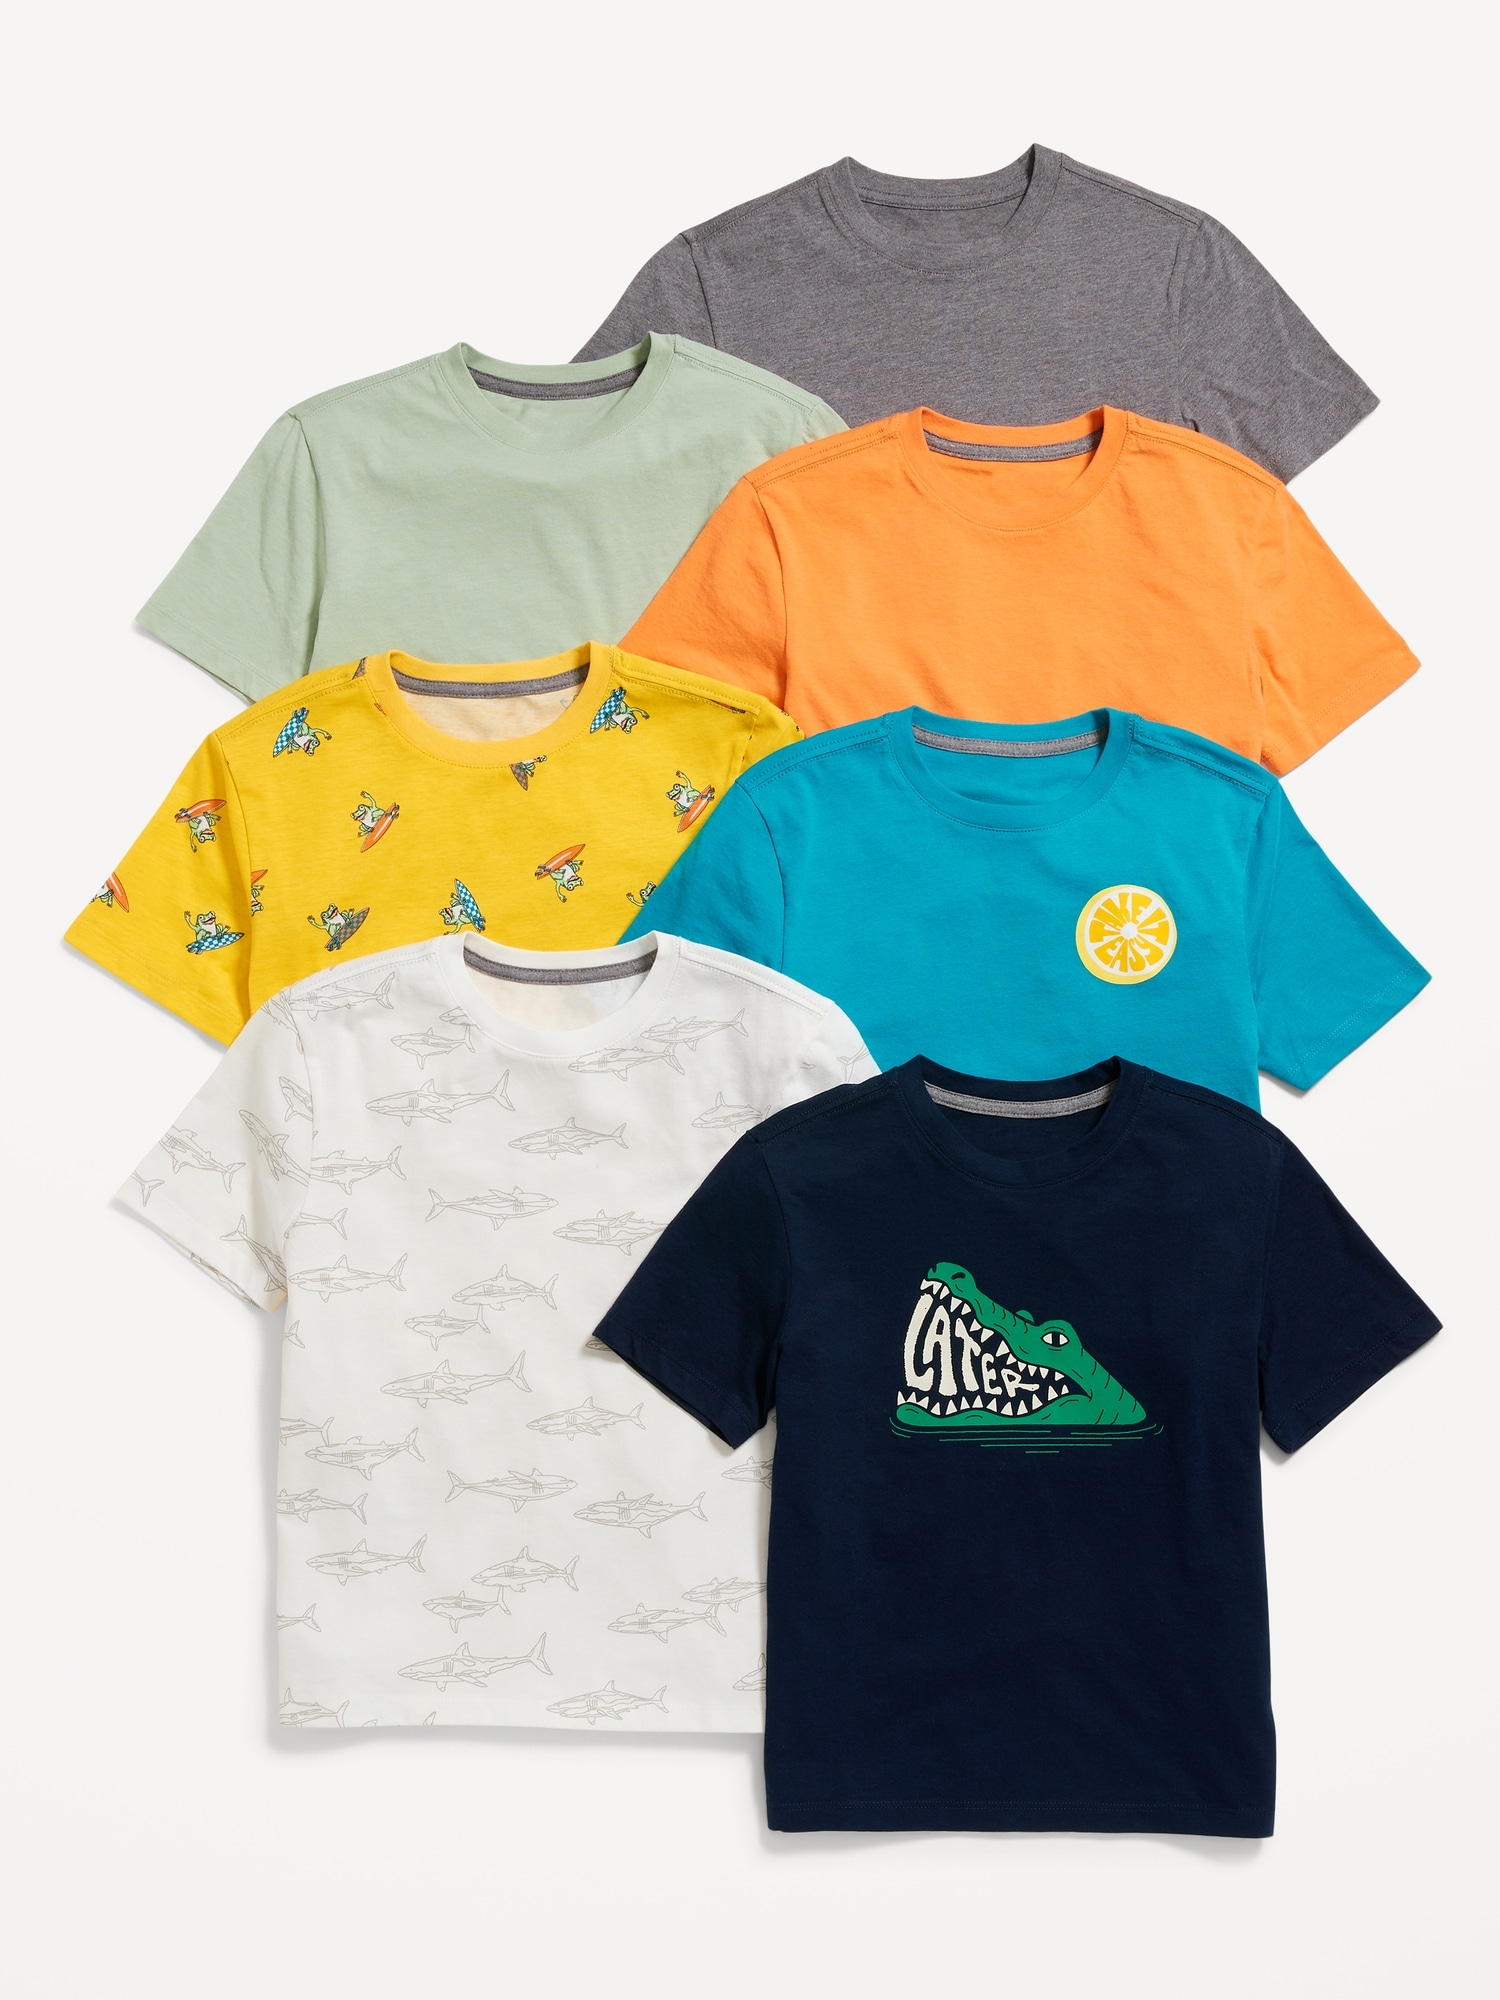 Old Navy Softest Crew-Neck T-Shirt 7-Pack for Boys gray. 1